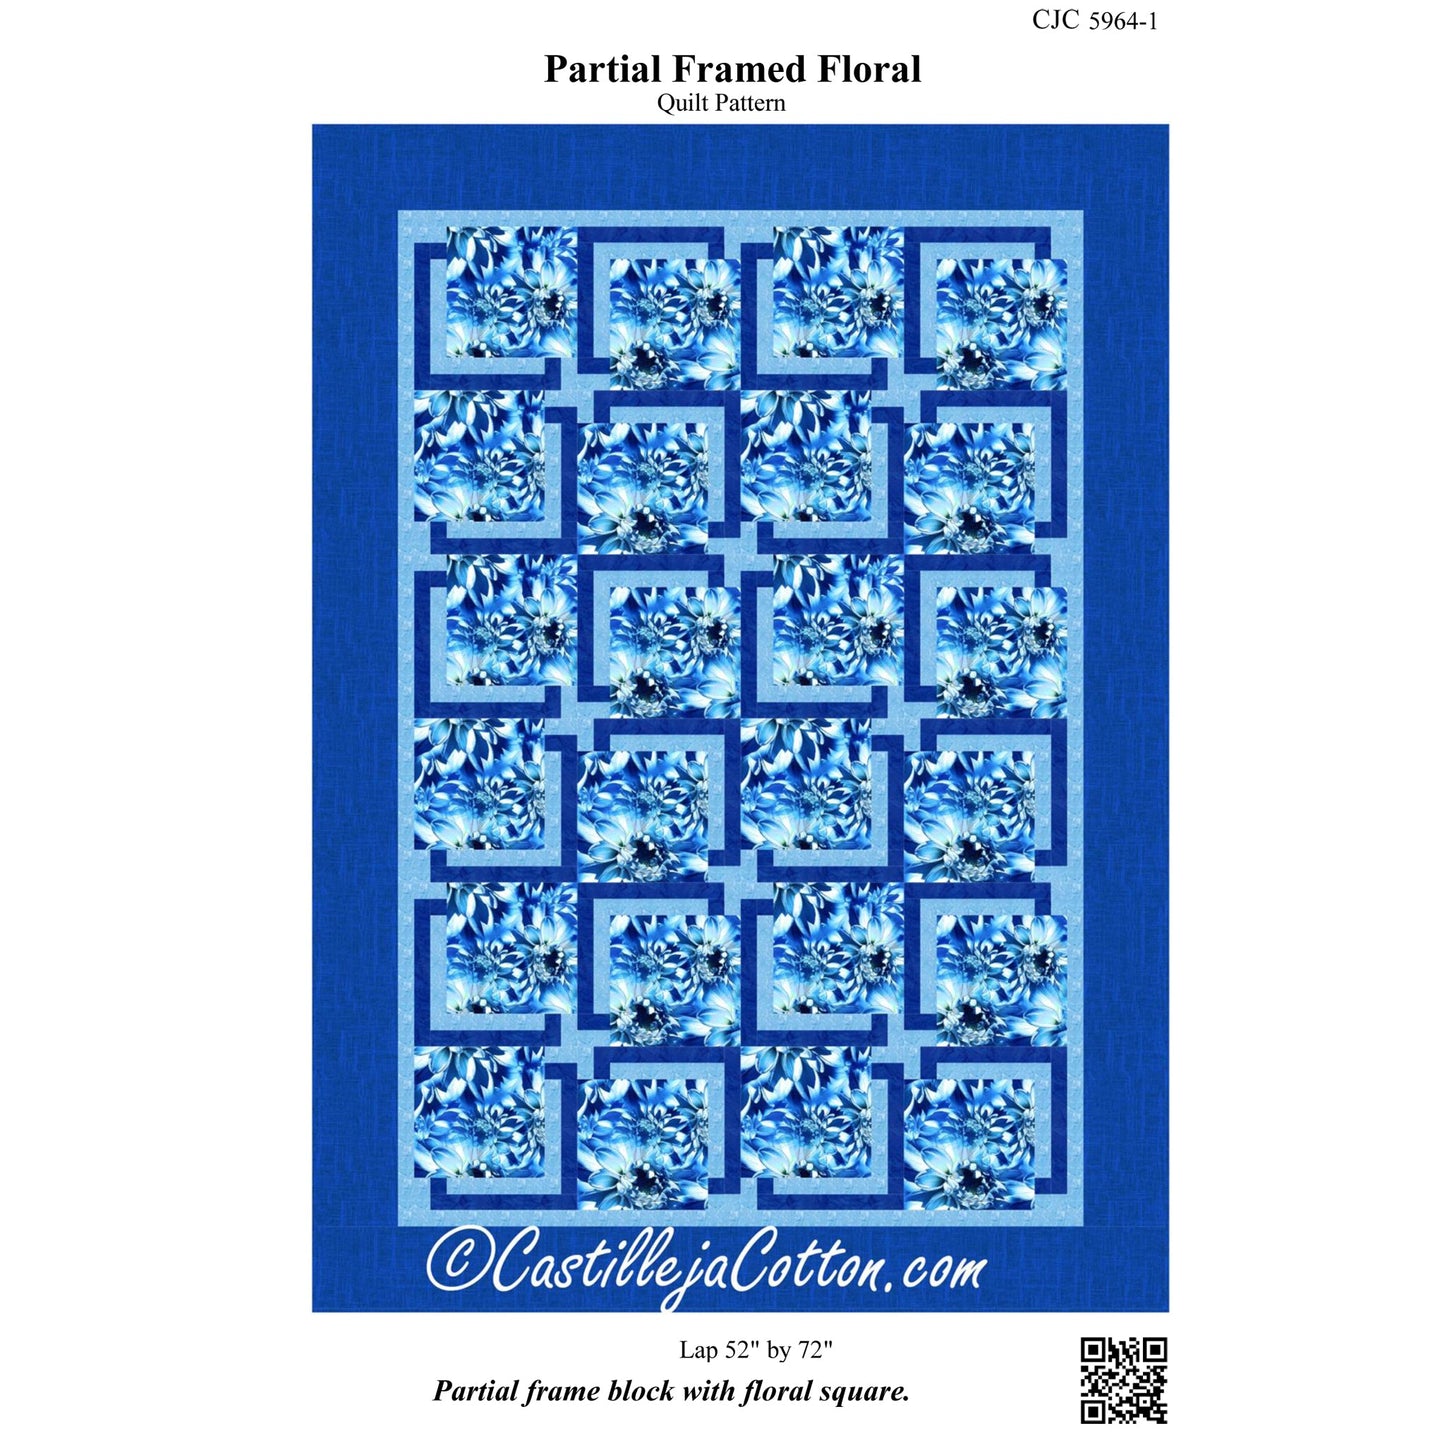 Cover image of pattern for Partial Framed Floral Quilt.